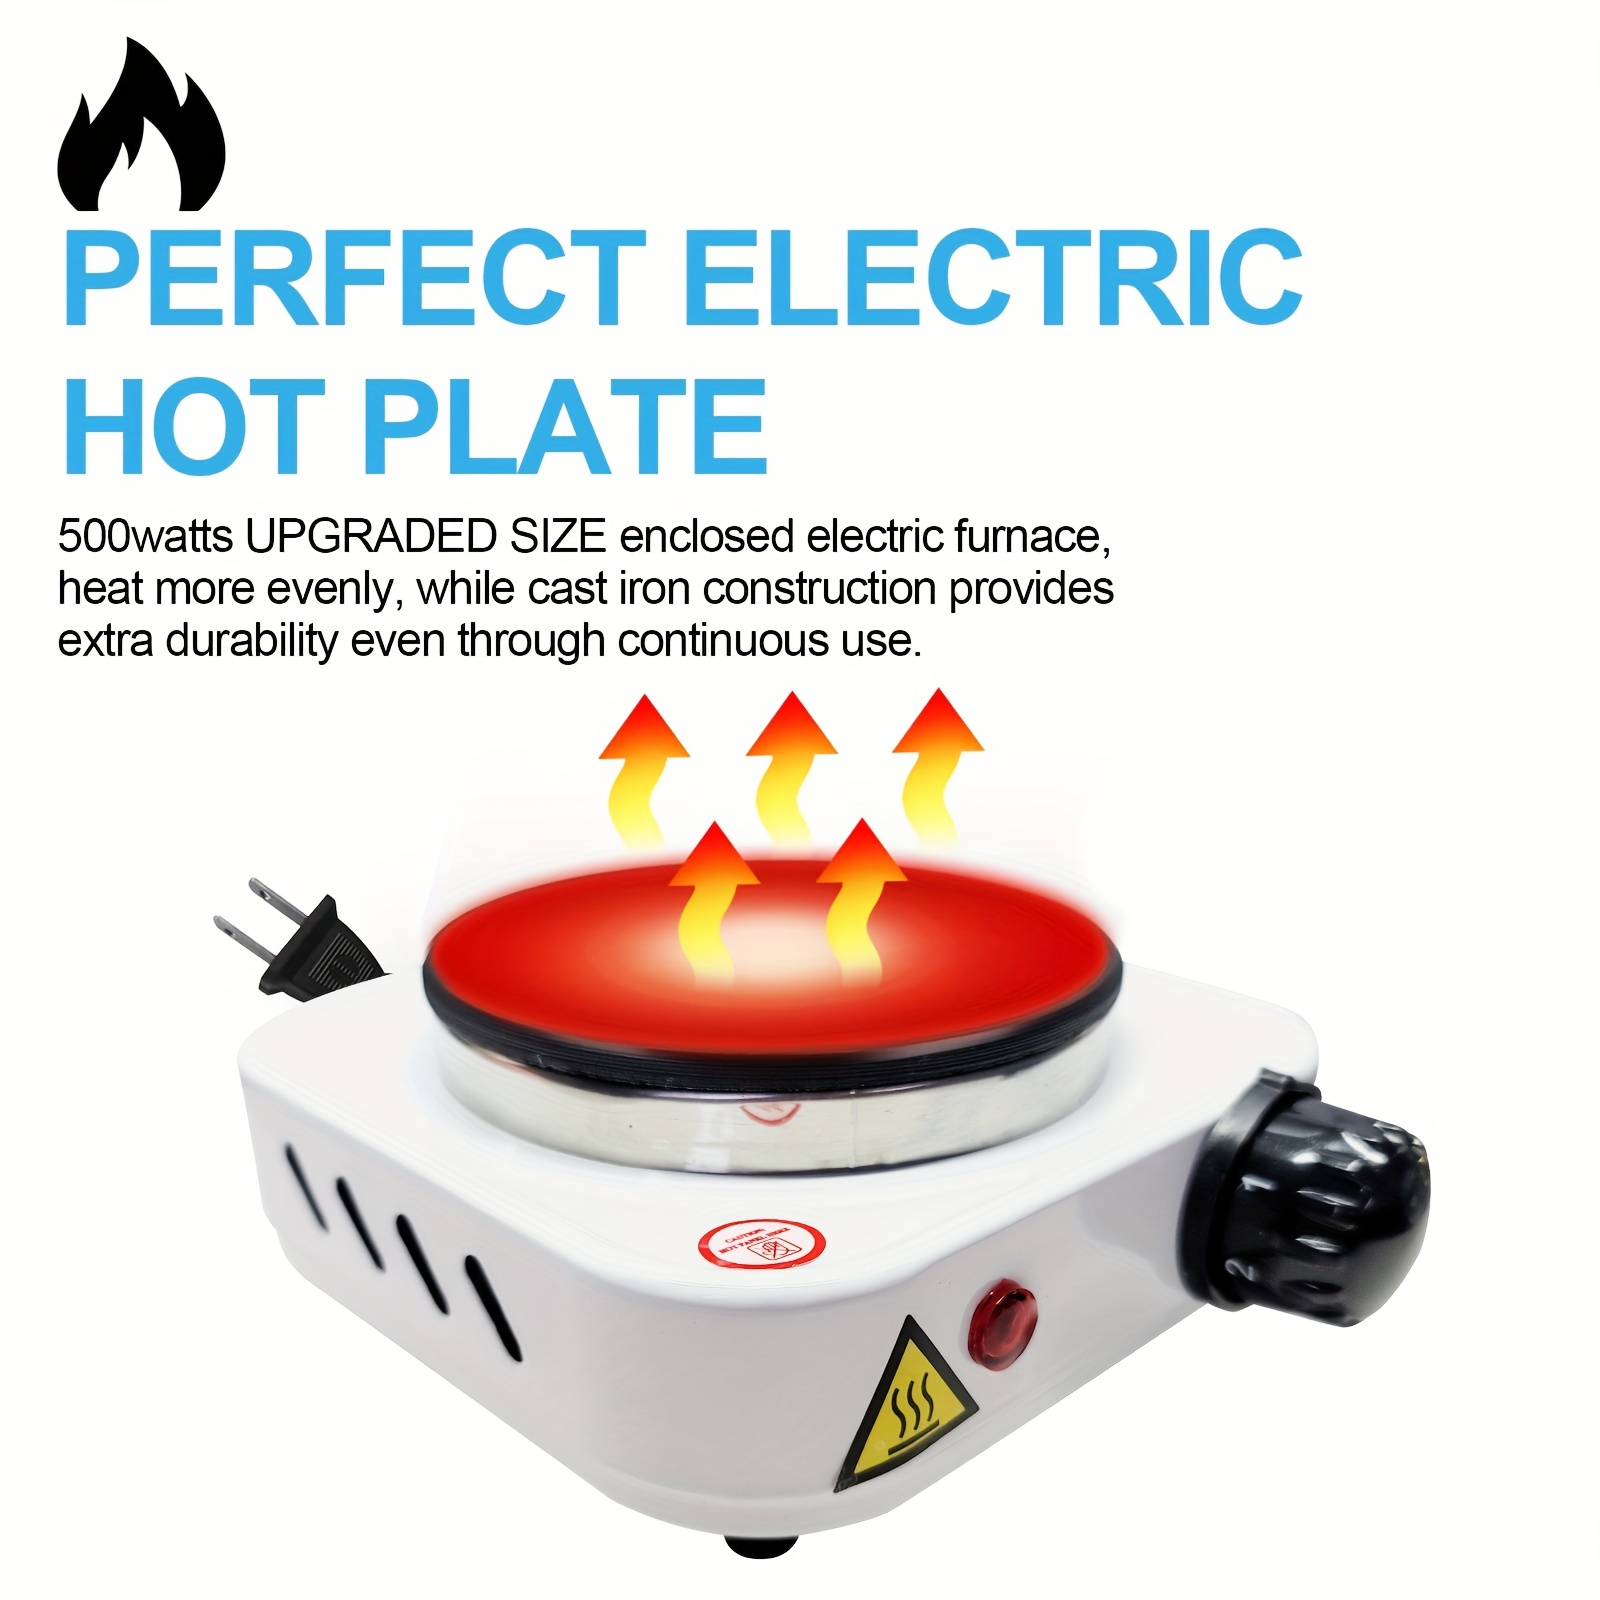 Hot Plate for Candle Making Electric Hot Plate for Melting Wax